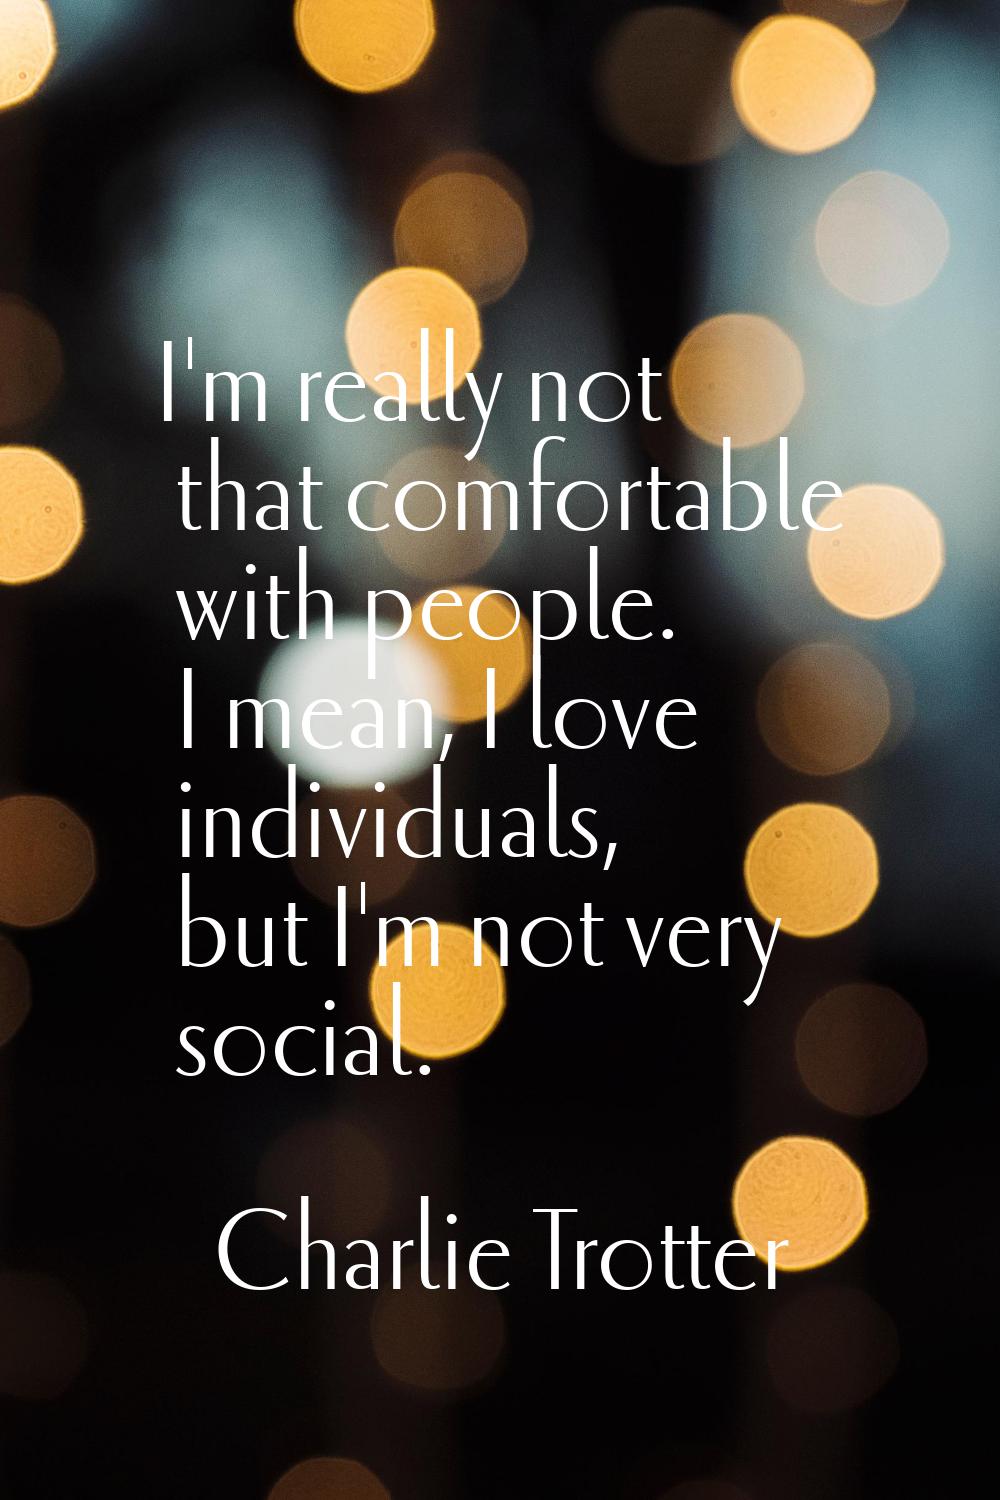 I'm really not that comfortable with people. I mean, I love individuals, but I'm not very social.